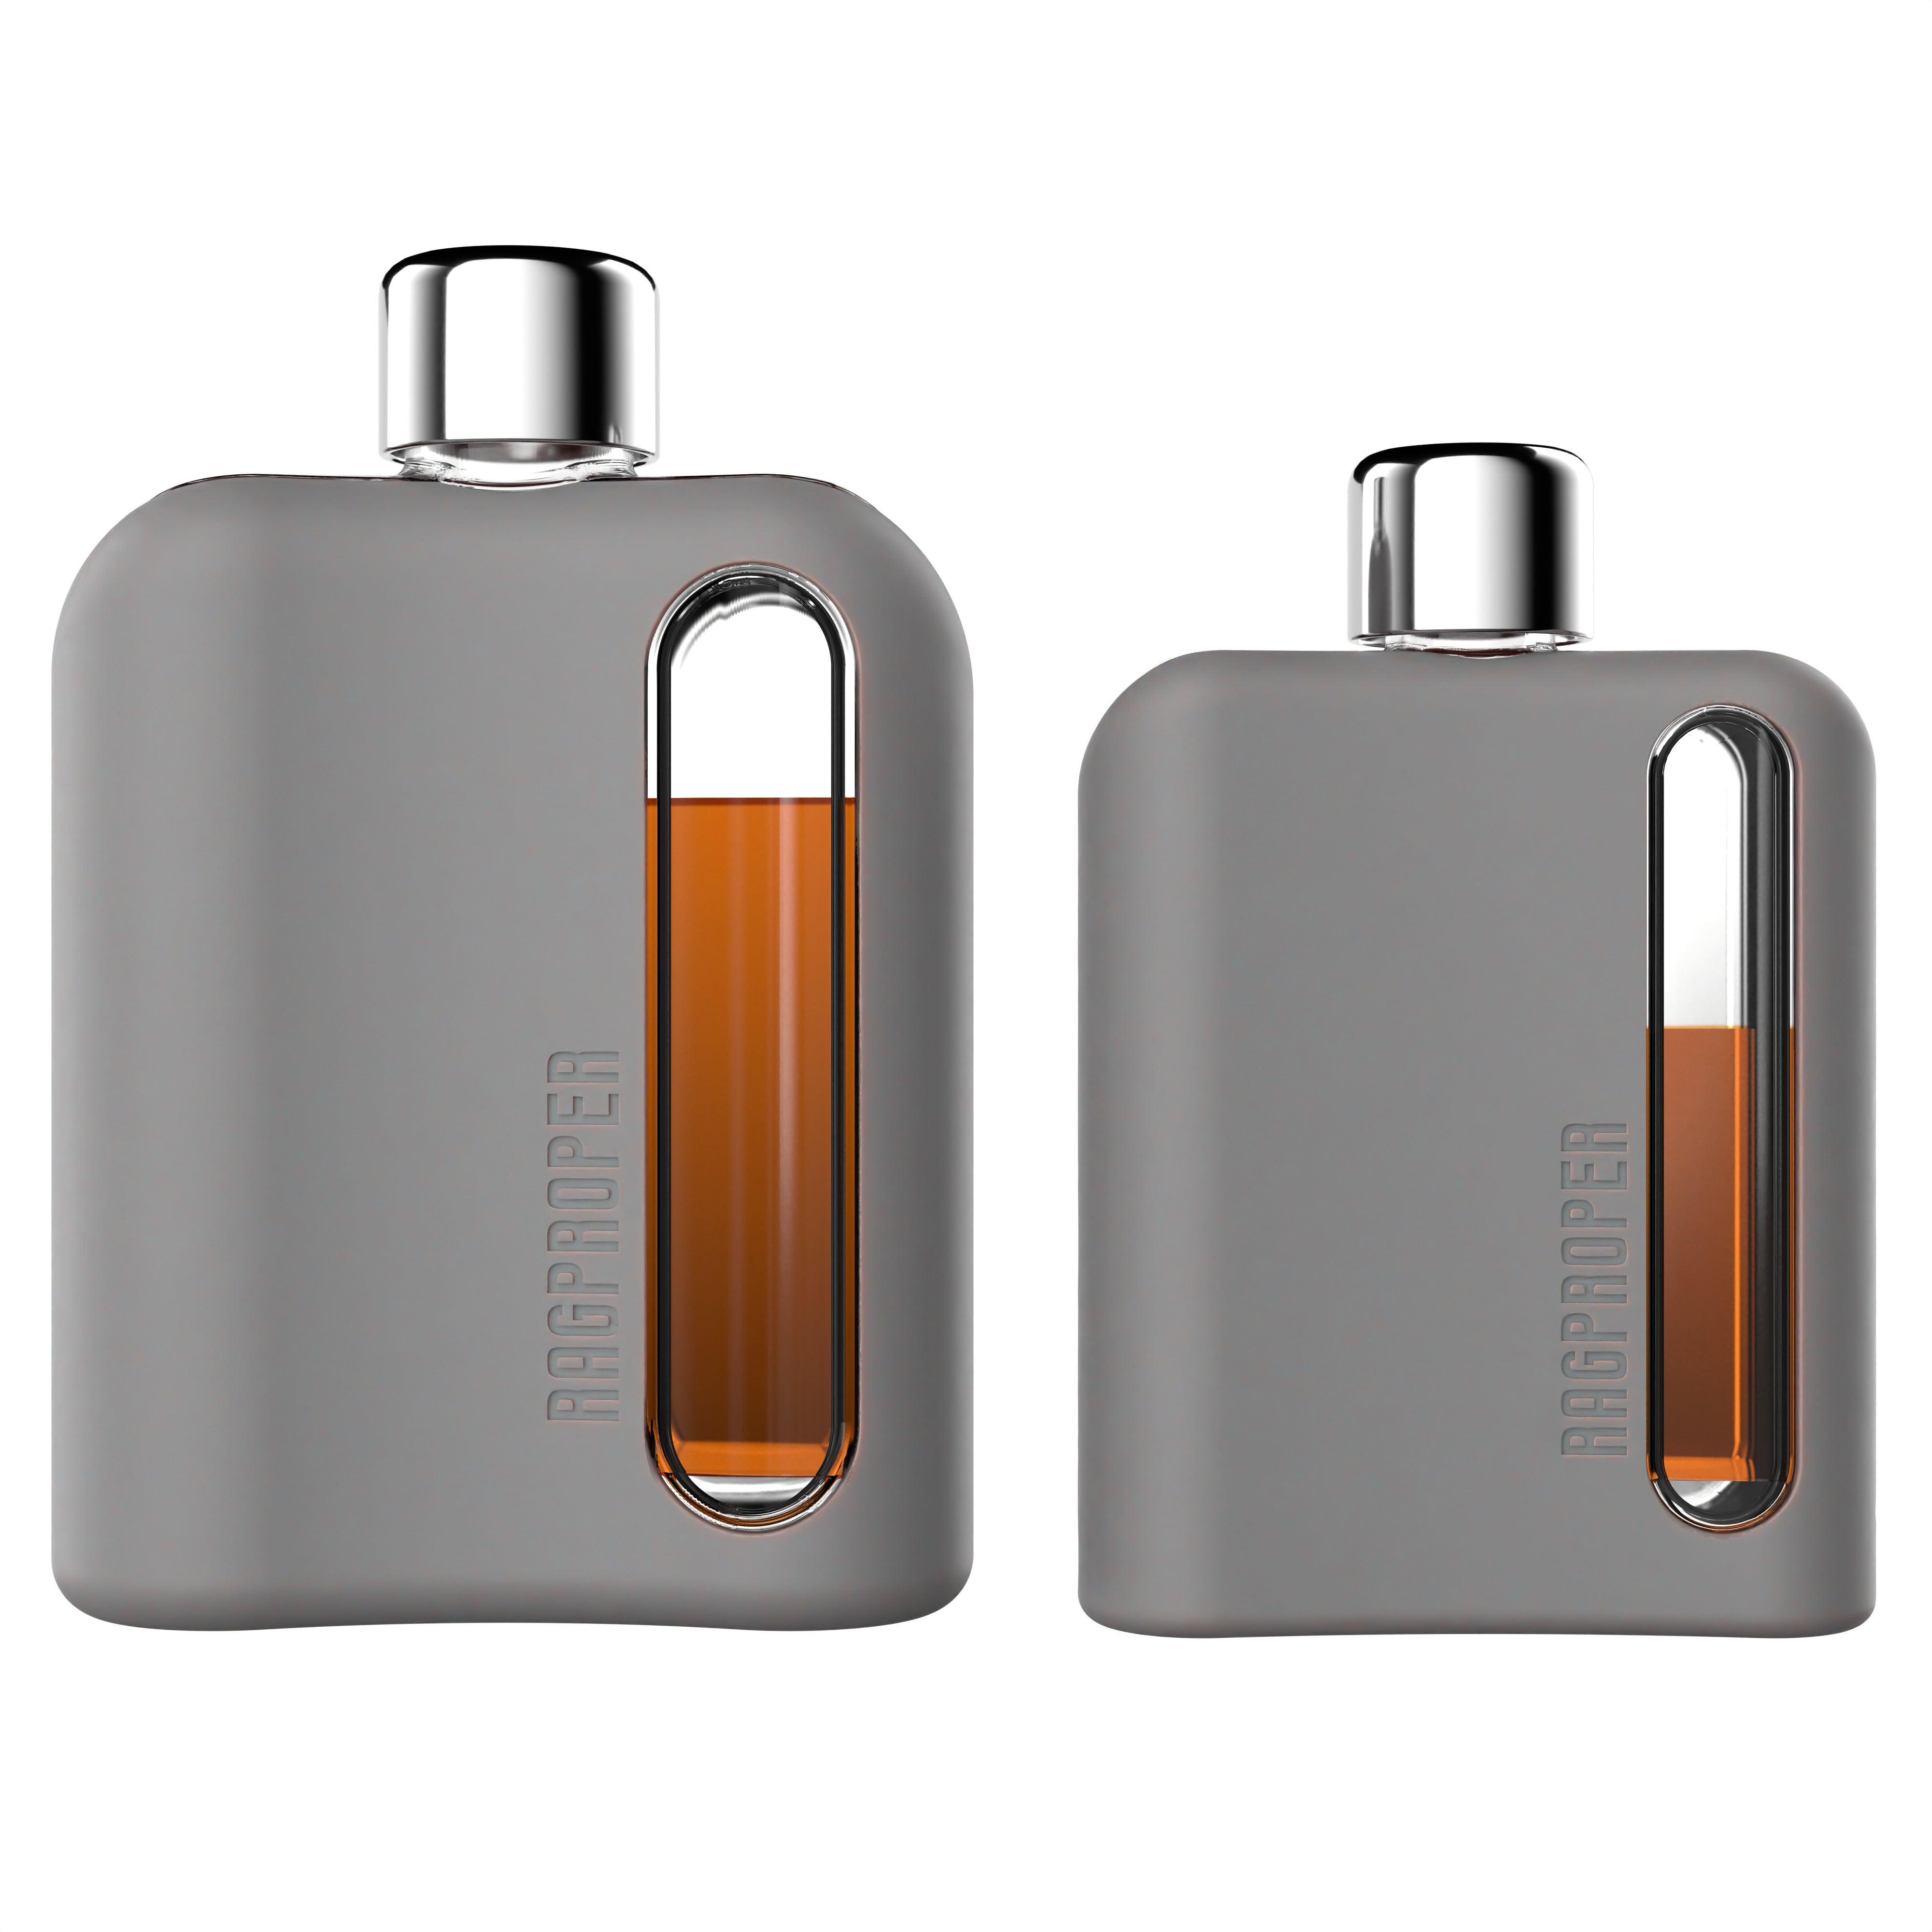 Ragproper Modern Glass Hip Flask with Cork & Silicone Lid Liners - Includes Metal & Plastic Lids, Funnel, Silicone Sleeve (Single Shot 100ml +